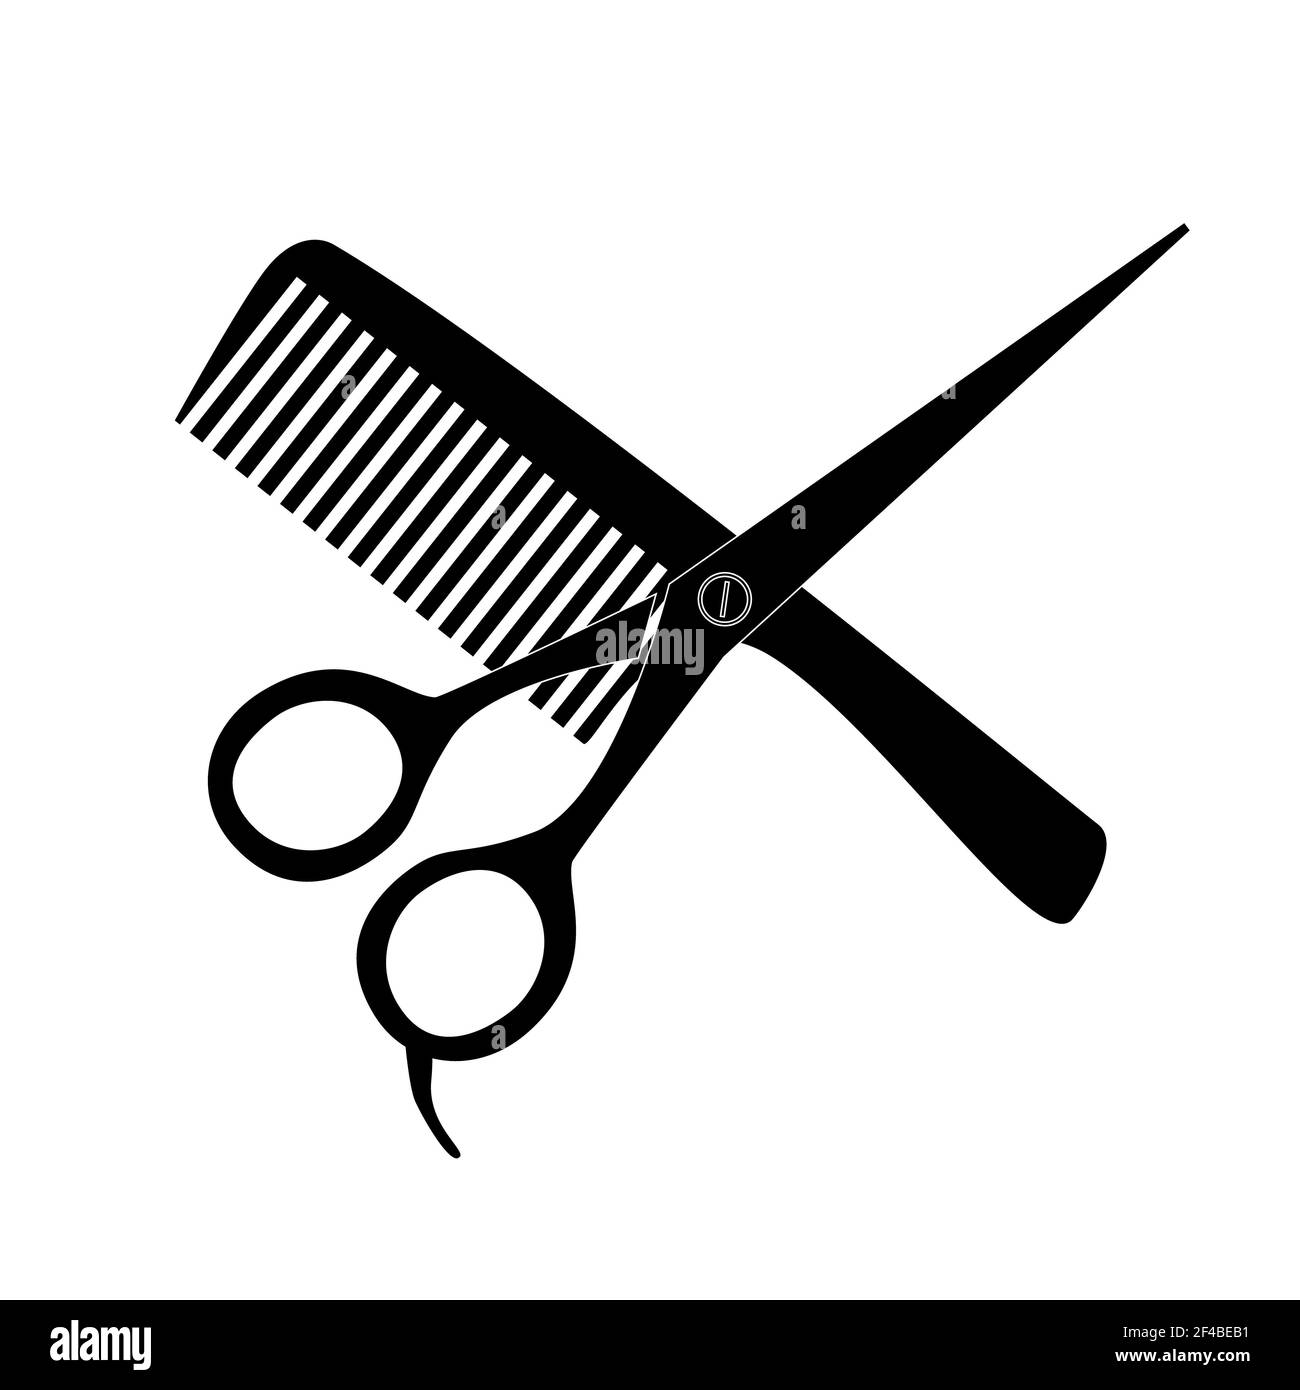 comb and scissors icon on white background. hair salon with scissors and comb sign. barber symbol. flat style. Stock Photo